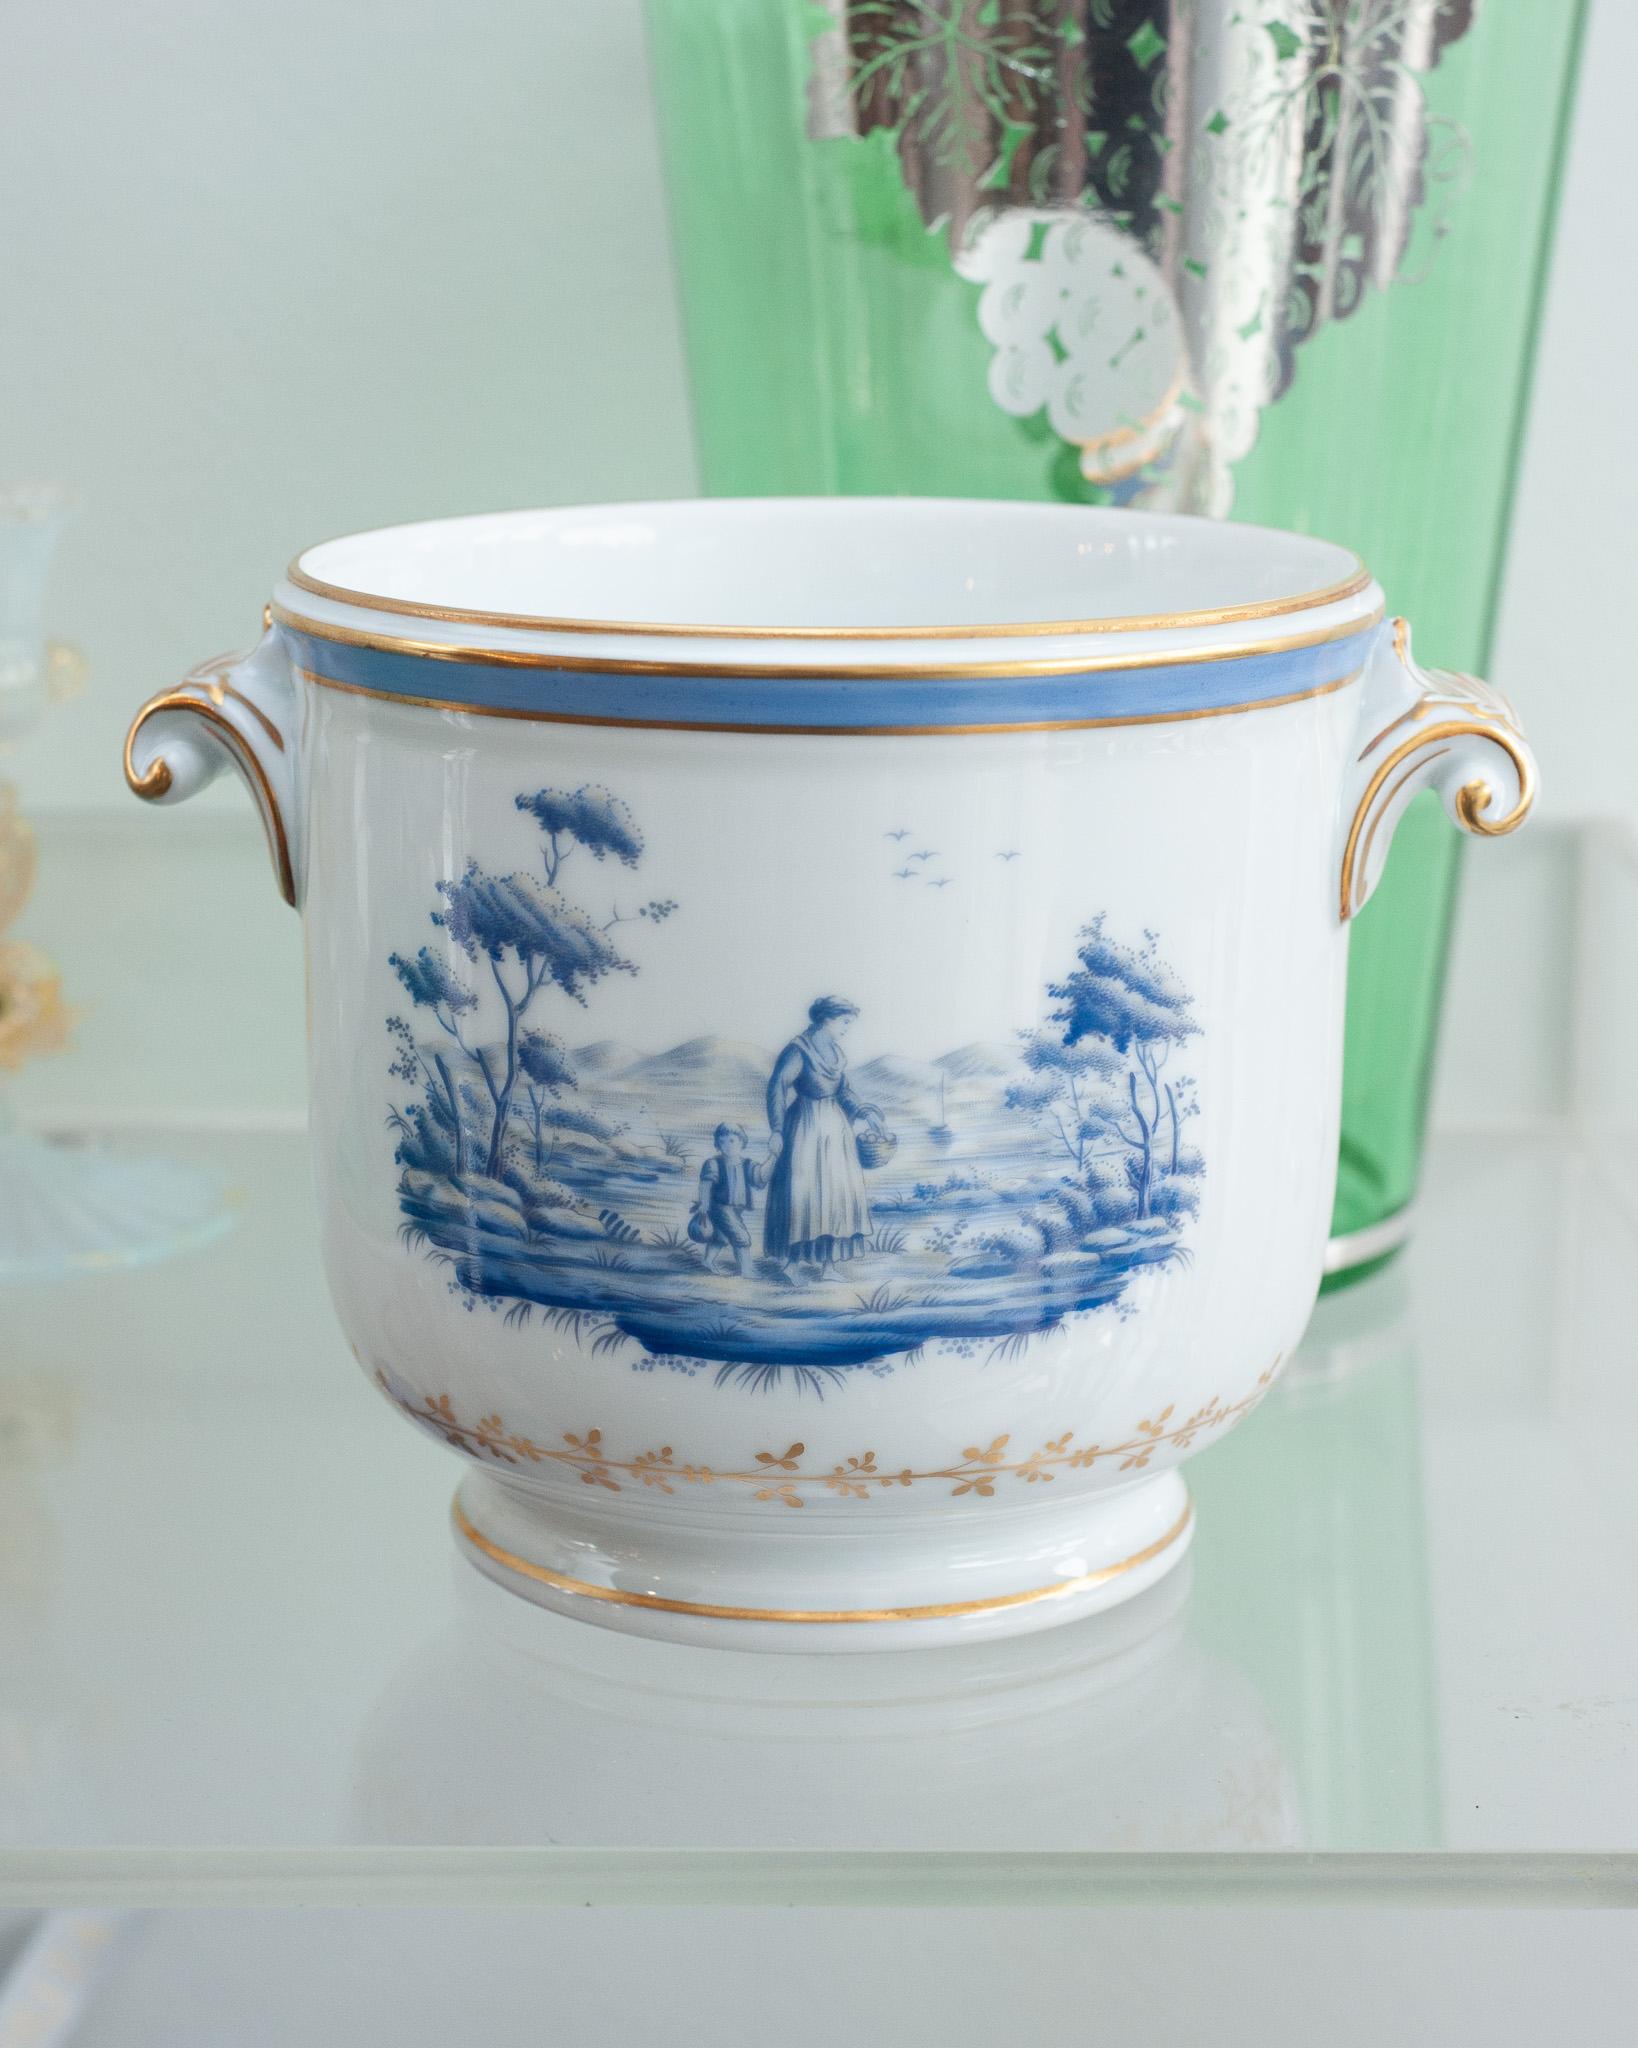 A beautiful mid century Richard Ginori Pittoria cachepot / planter. Elegant and classic, this cachepot has gilded features, scroll handles, and showcases two countryside scenes on each side in blue on a background of white porcelain. 